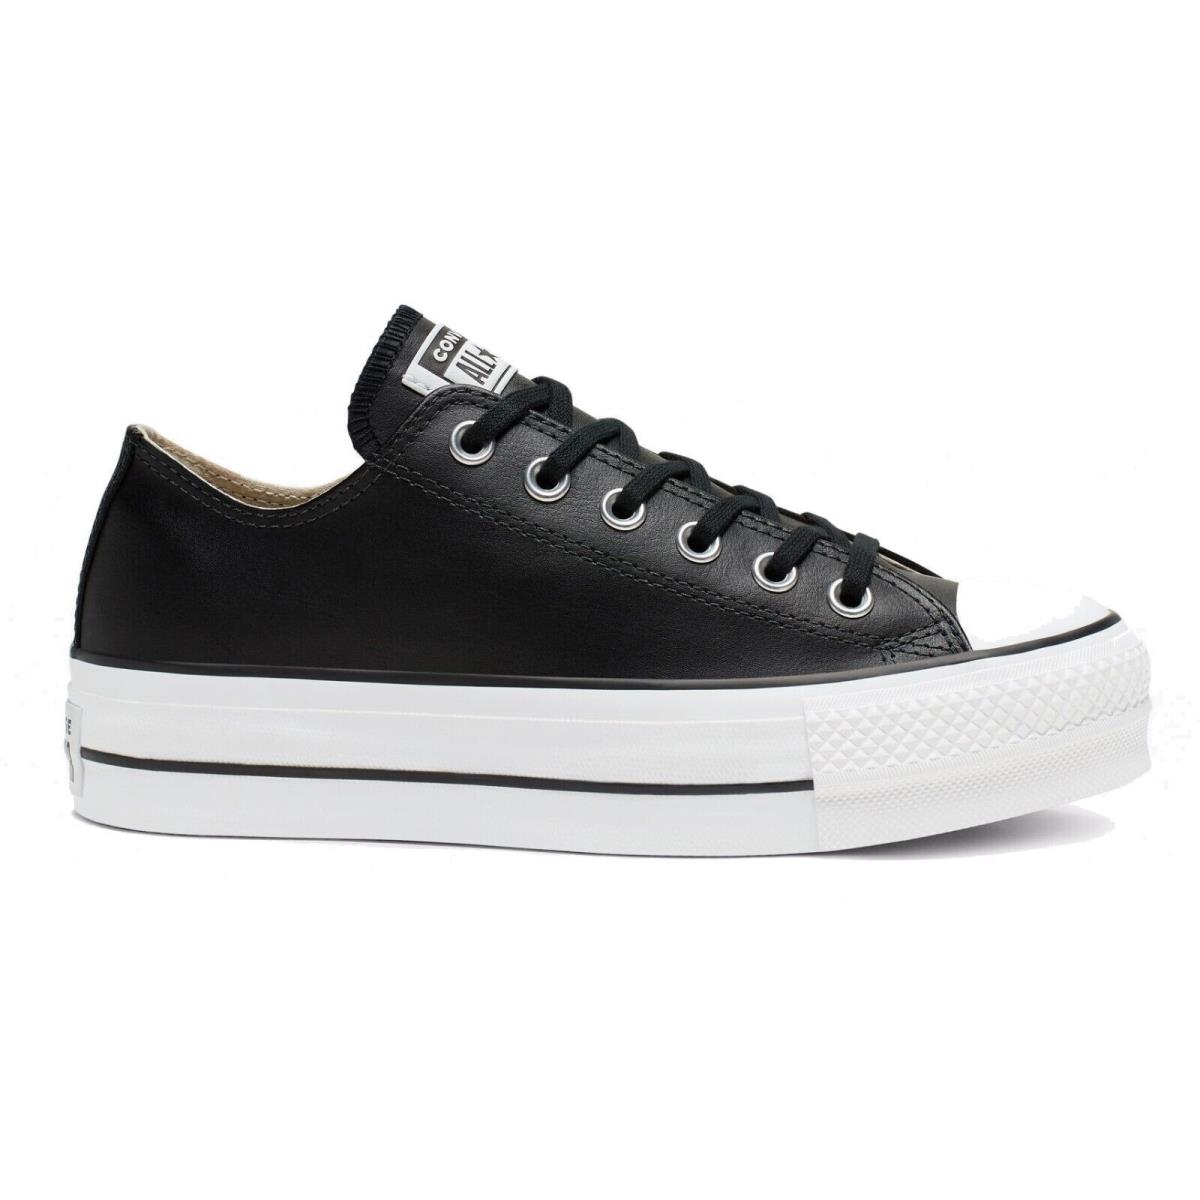 Converse Chuck Taylor All Star Lift Platform Leather Women`s Shoes Sneakers Black